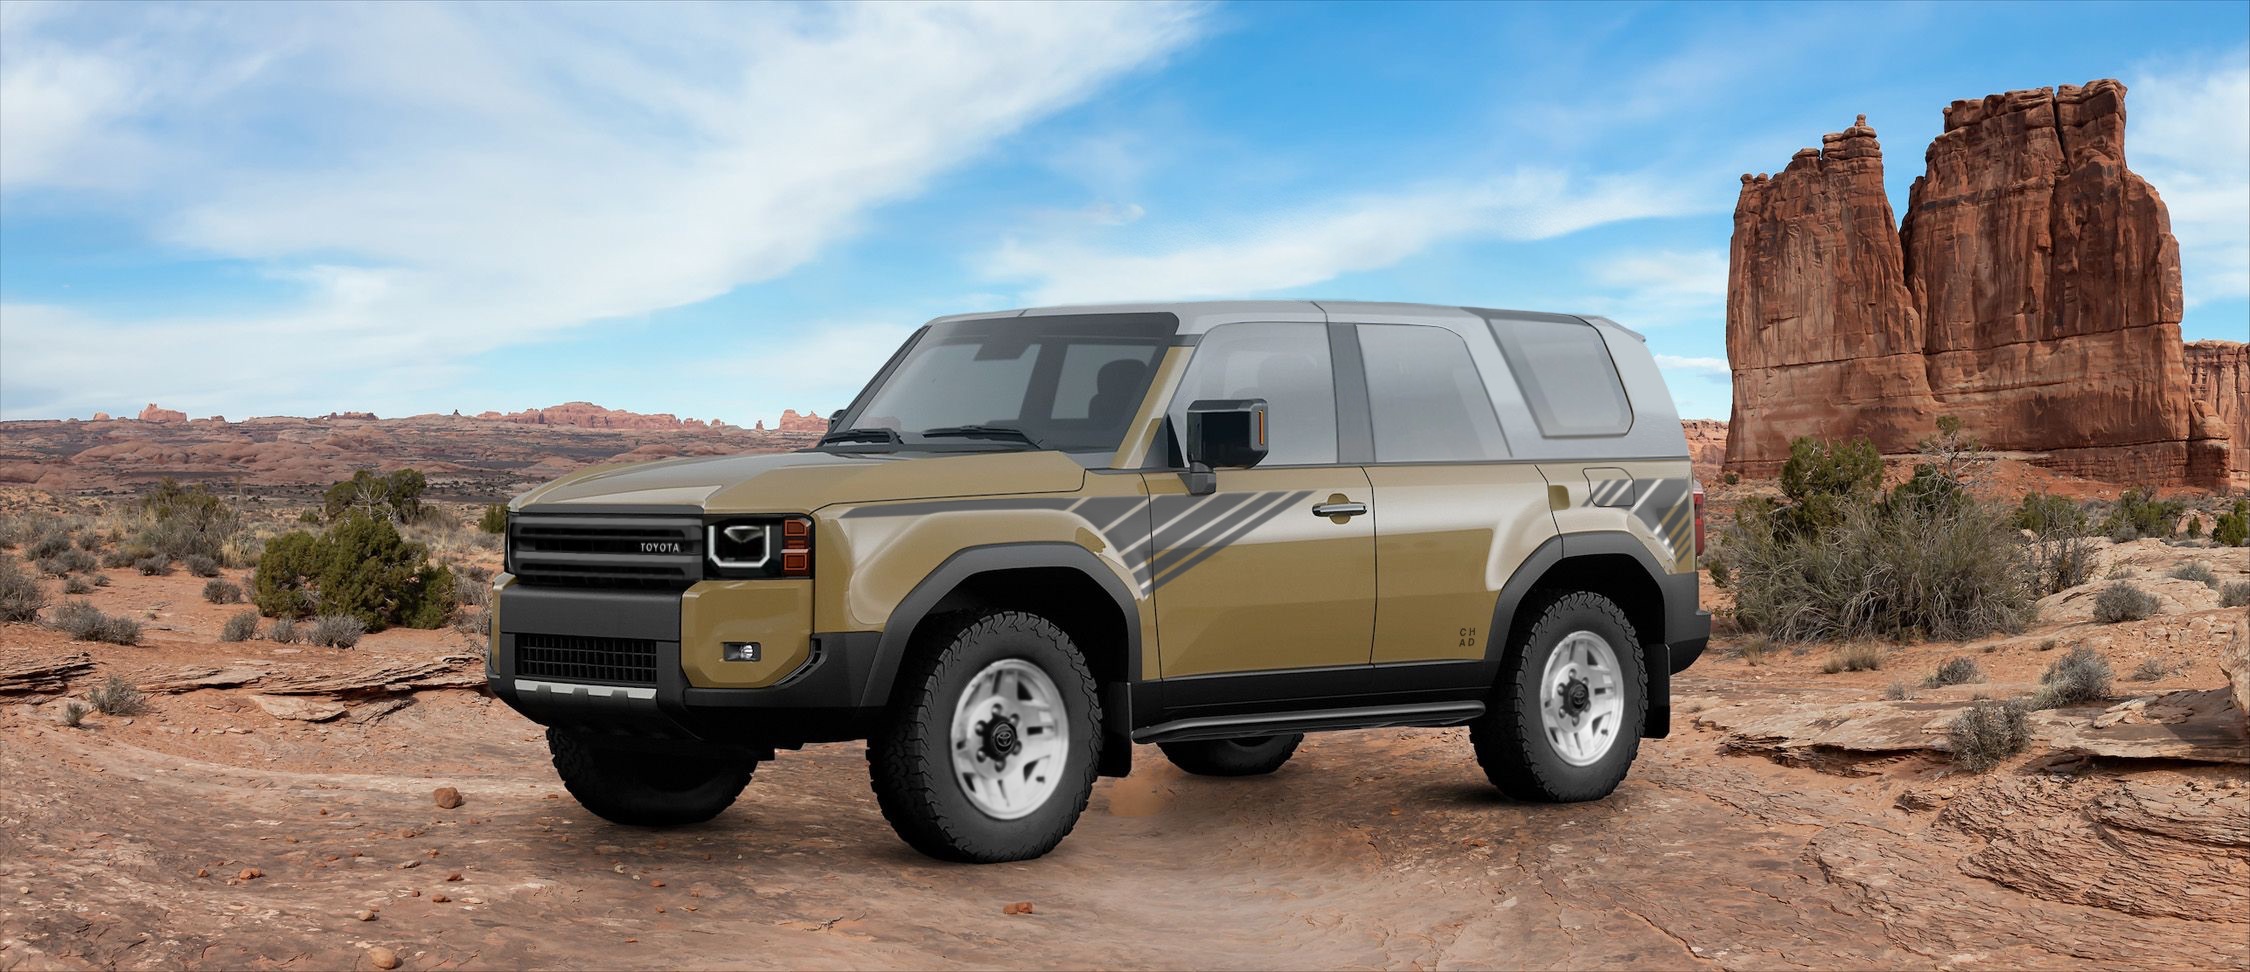 2025 Toyota 4runner Rendered: Topless 2025 4Runner based on the LC250. 1AC92BFA-2F34-4814-96DC-DF9338FE1A89